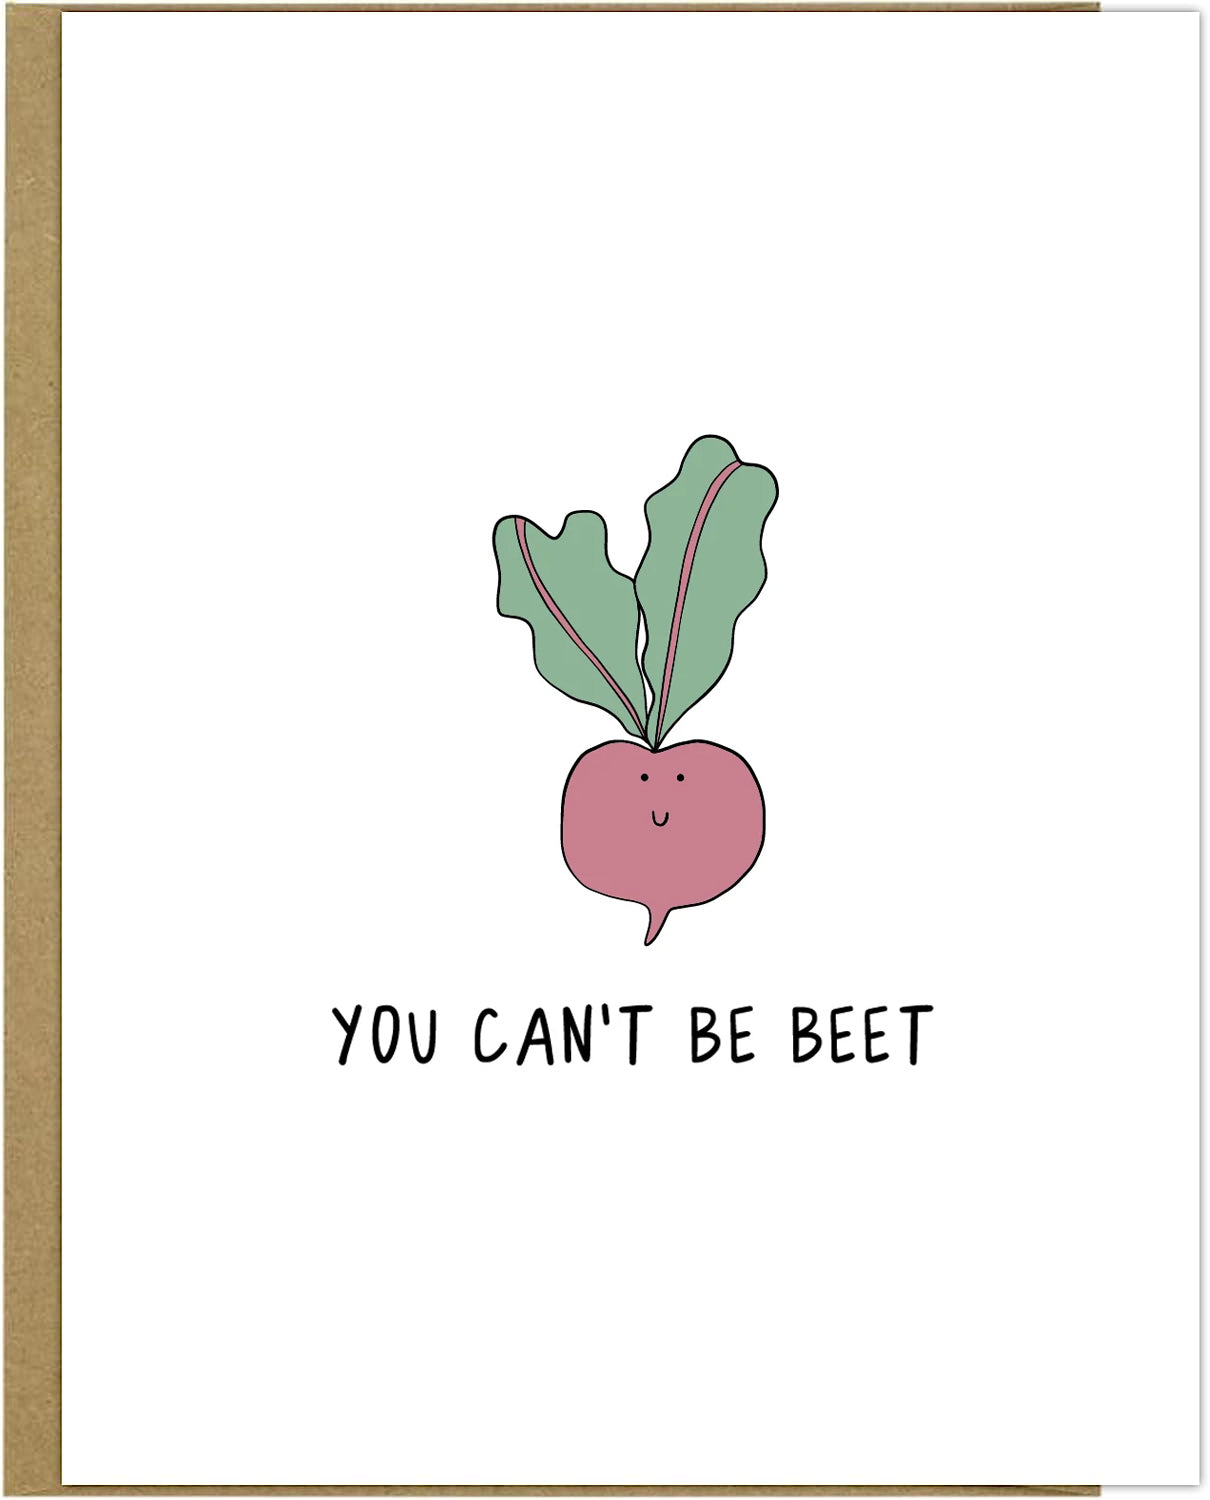 Can't Be Beet Card